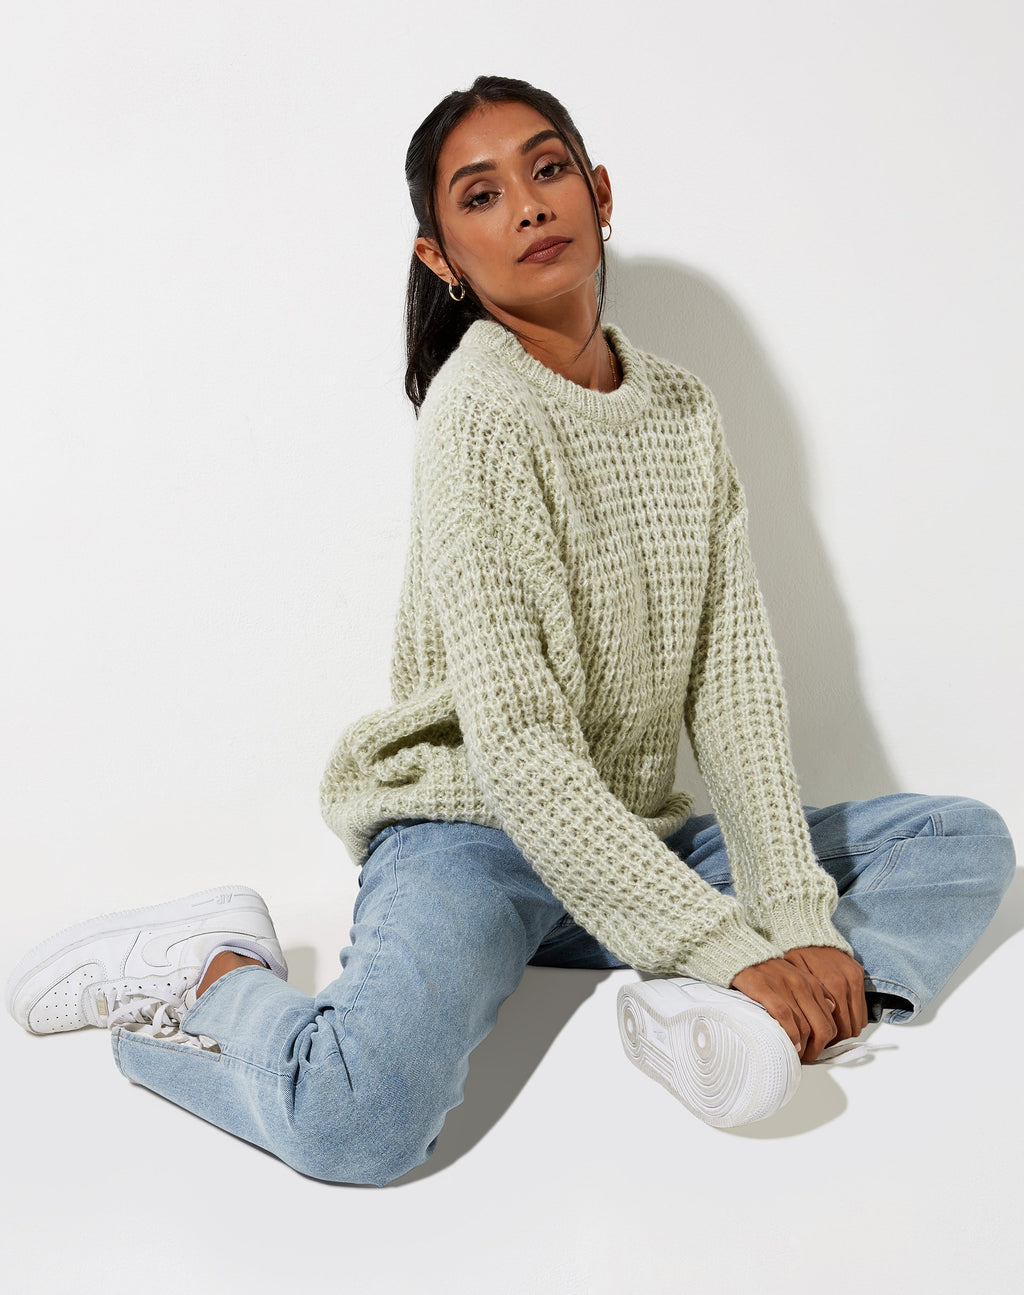 Caribou Jumper in Chunky Knit Mint